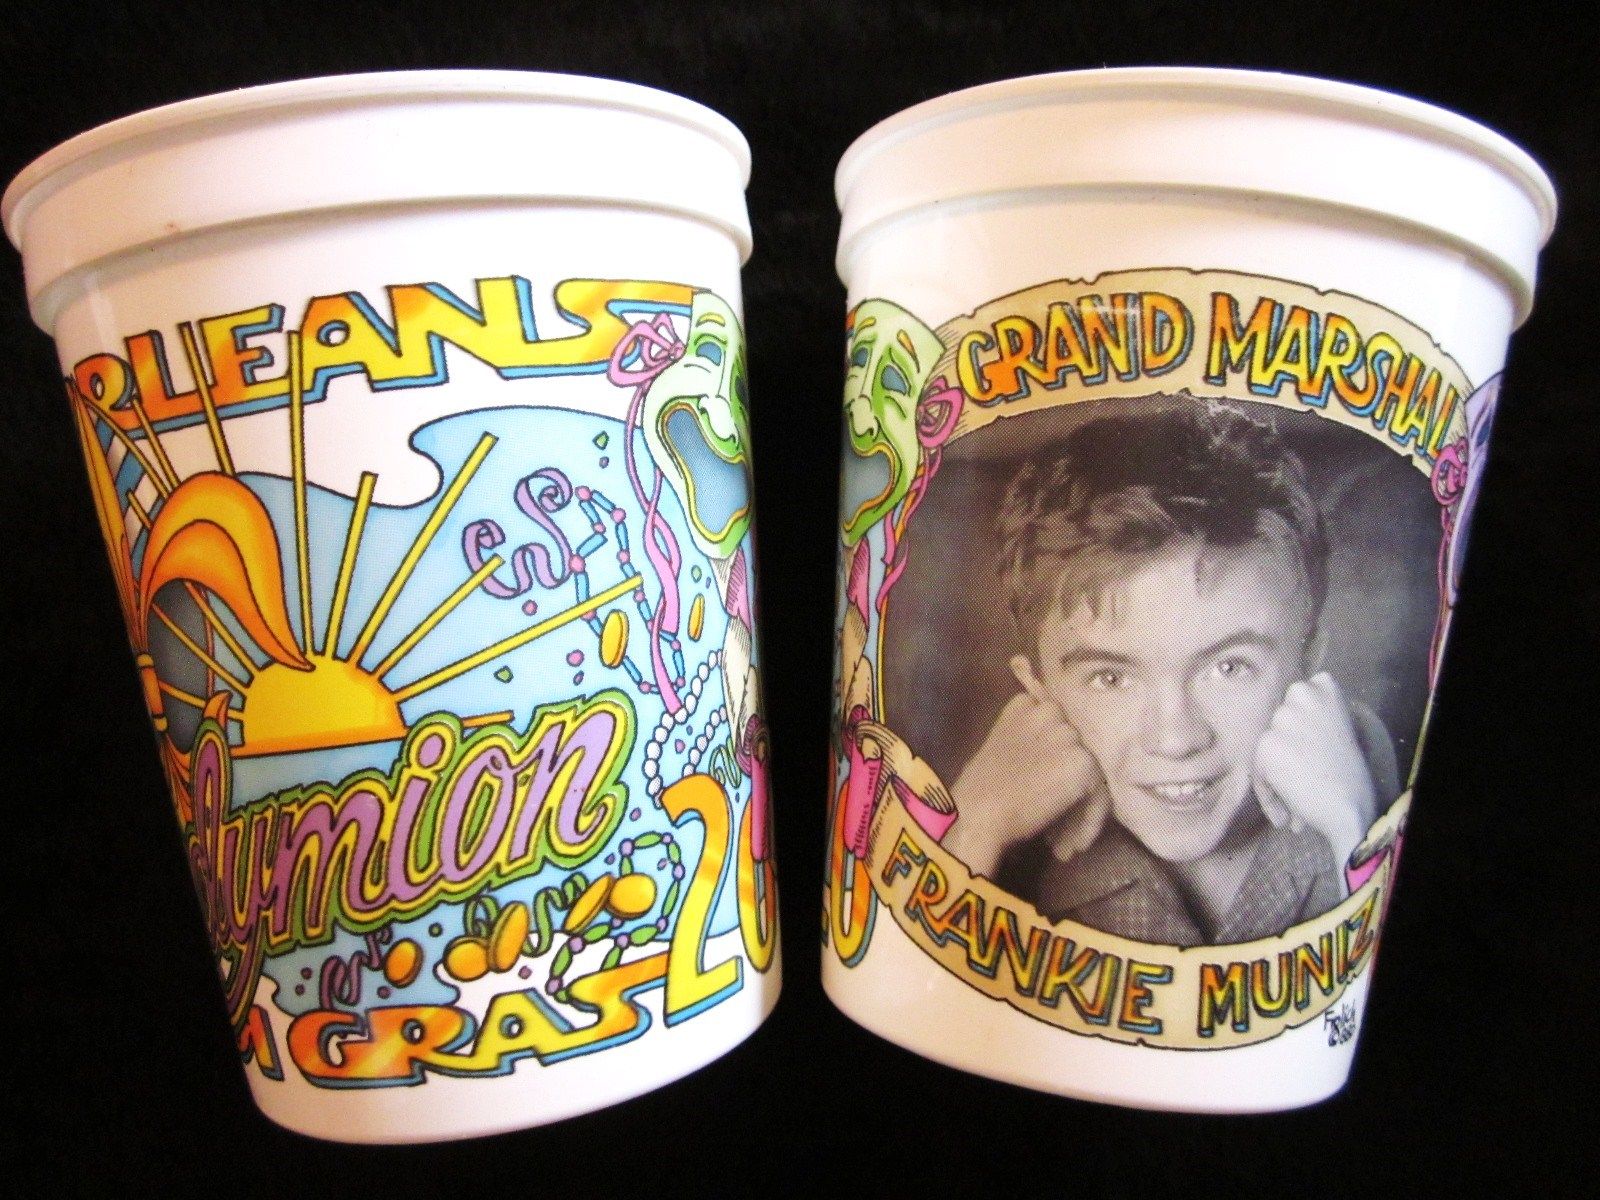 Special Frankie Muniz cups made for the 2001 New Orleans Mardi Gras parade